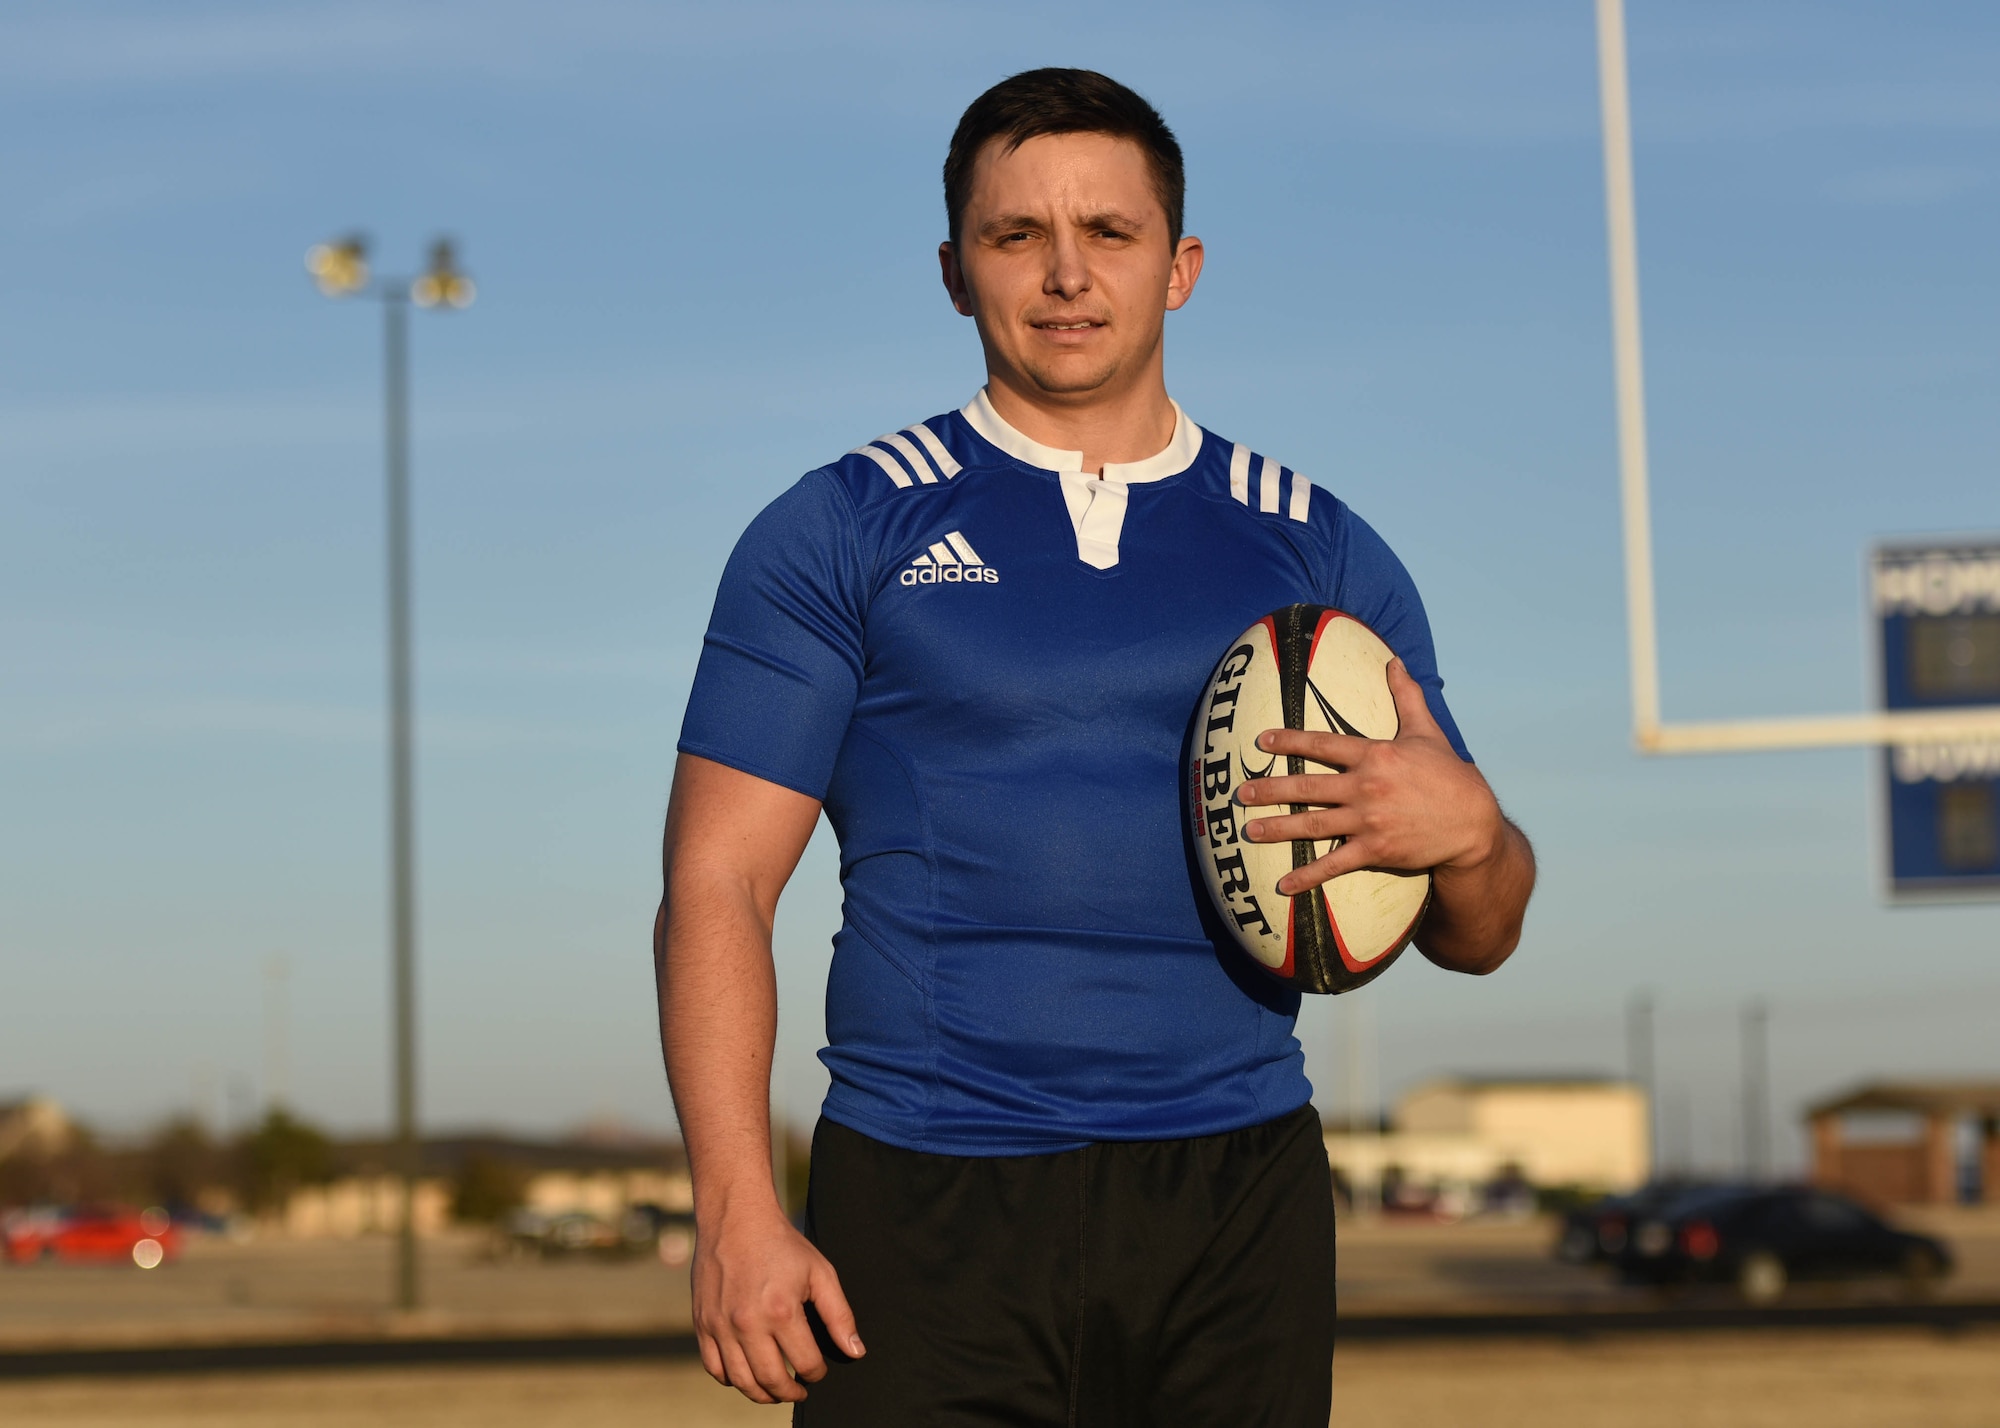 U.S. Air Force 2nd Lt. Jacob Kirkland, 97th Contracting Flight contracting specialist, poses during rugby practice, Feb. 10, 2017, Altus Air Force Base, Oklahoma. Kirkland was selected to play on the USAF rugby sevens team in the Las Vegas Invitation tournament, March 3-5. (U.S. Air Force photo by Senior Airman Nathan Clark/Released)